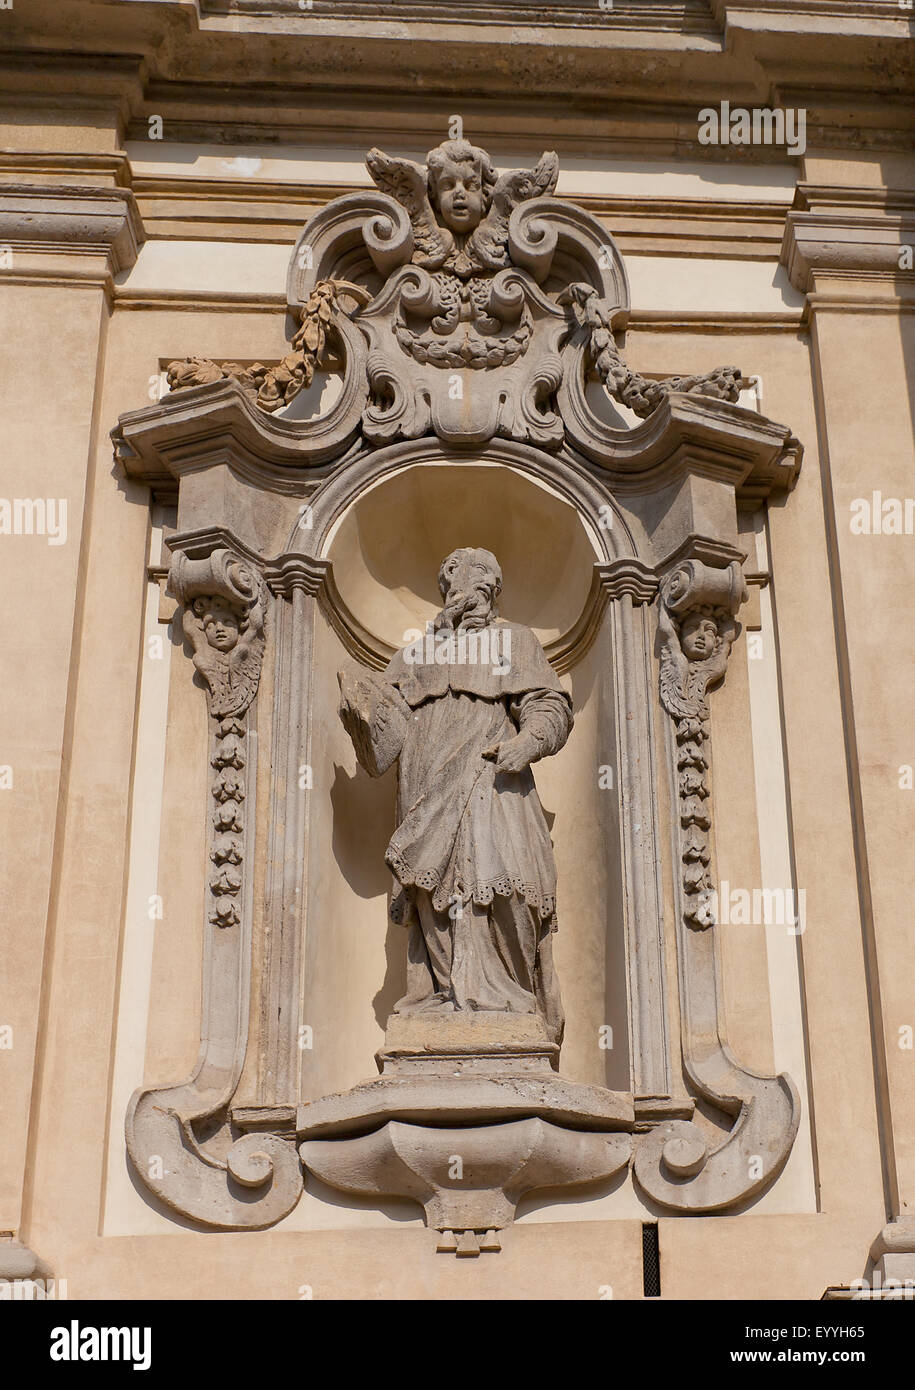 Statue of Charles Borromeo, the archbishop of Milan from 1564 to 1584, on facade of  Church of Santa Maria della Passione in Mil Stock Photo